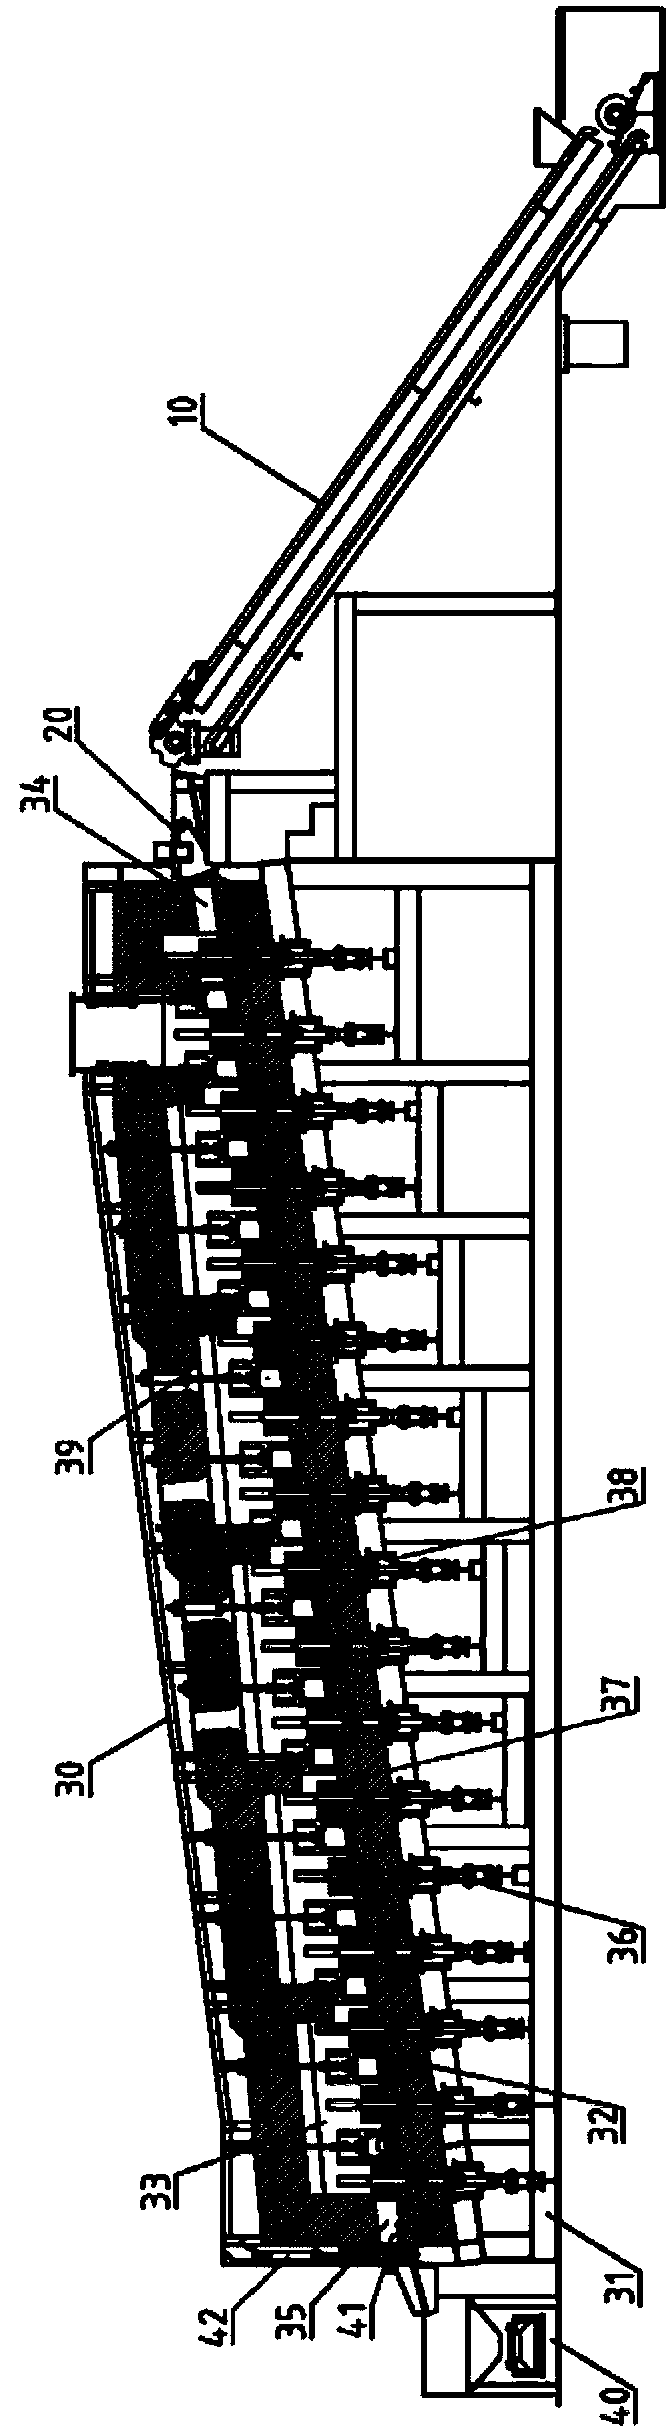 Control structure of heating chamber of steel ball reheating furnace